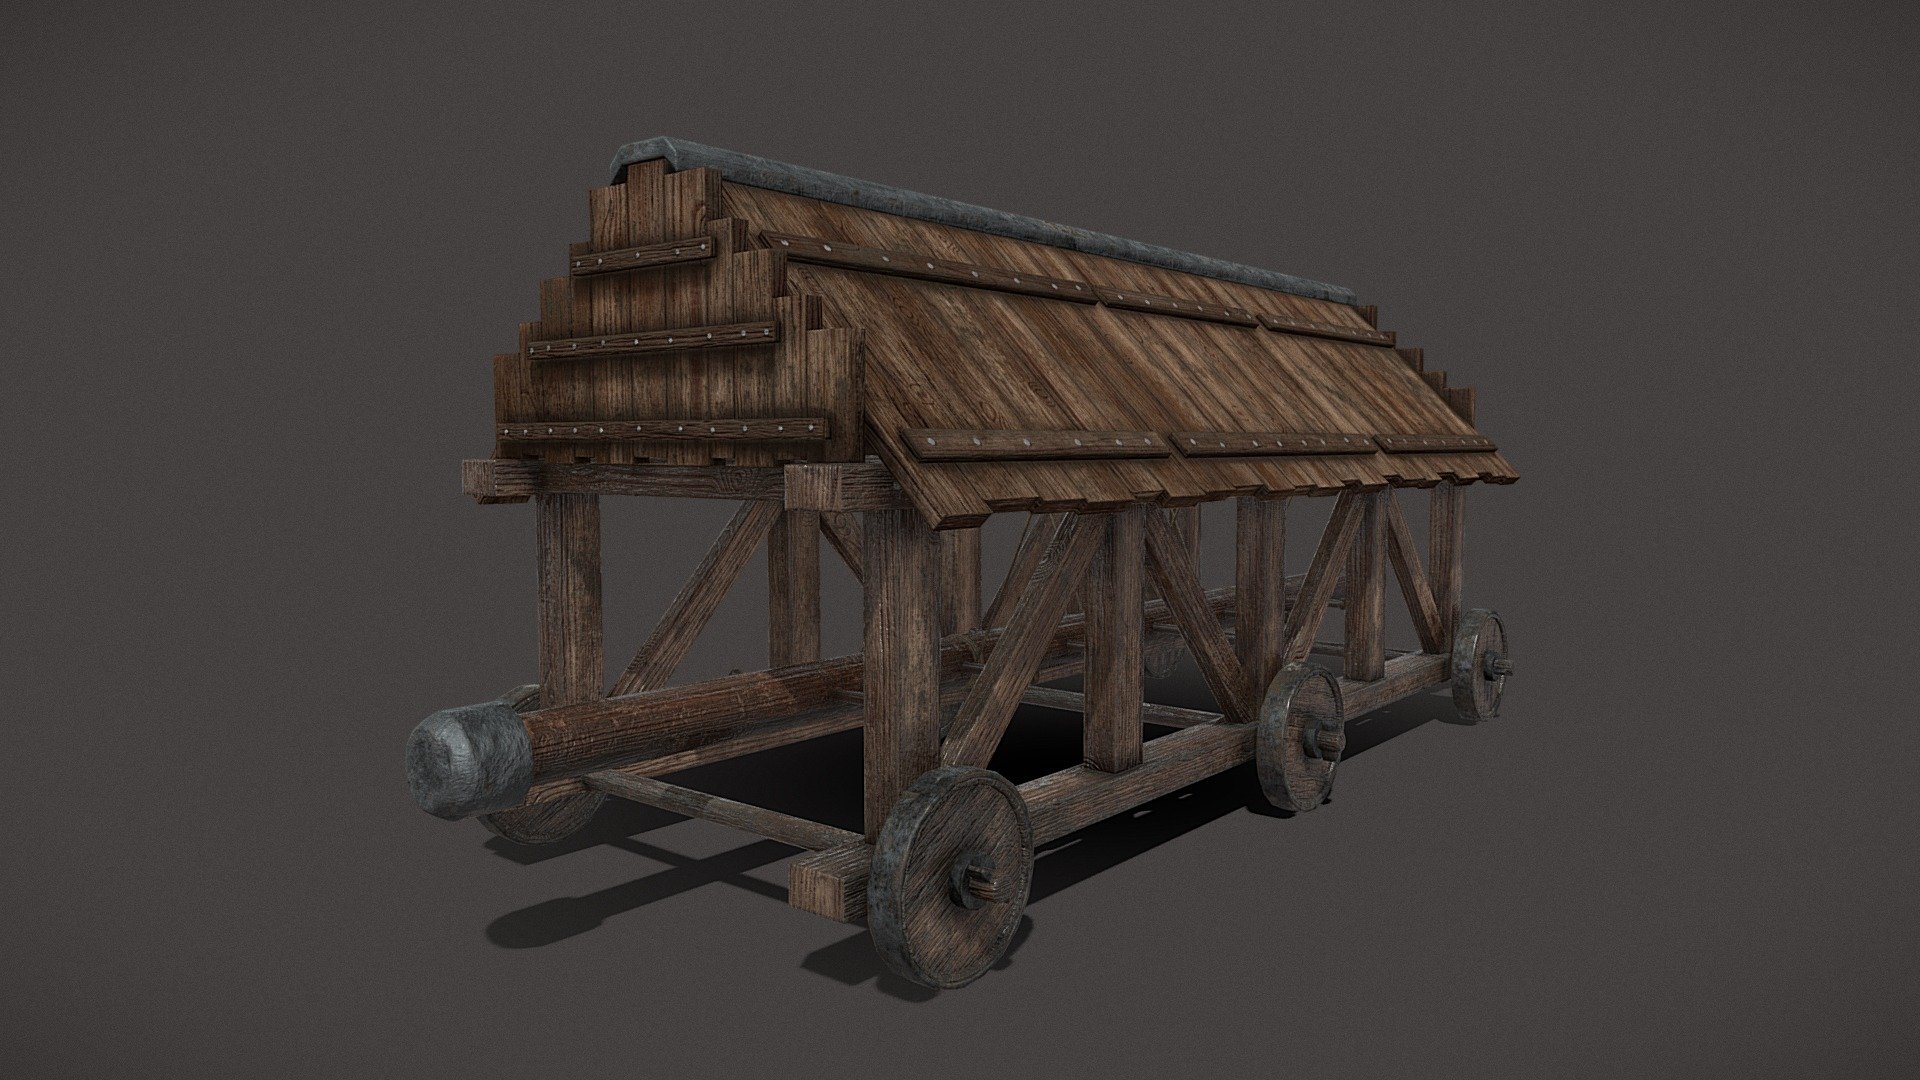 Battering Ram 3D Model. RIGGED. ANIMATION is realistic swinging of the the center pole to make impact with a door or wall. A Battering Ram is a siege engine that originated in ancient times and designed to break open the masonry walls of fortifications or splinter their wooden gates. The Battering Ram is among the oldest used siege weapons and its history can be traced back to the ancient Assyrians whose images have been found using battering rams from about 9th century BC. Subsequently, it was used by Greeks and Romans as well as other people throughout the world. The design of Medieval Battering Ram could also serve as a bridge across a defensive moat or ditch! When a wall had been breached the ram could be used as an access route to the castle. No two rams were the same. They were designed to gain the maximum effect when attacking the defences of the castle. Model uses three materials. Battering Ram Body, Roof and Rope &amp; Handles 3d model